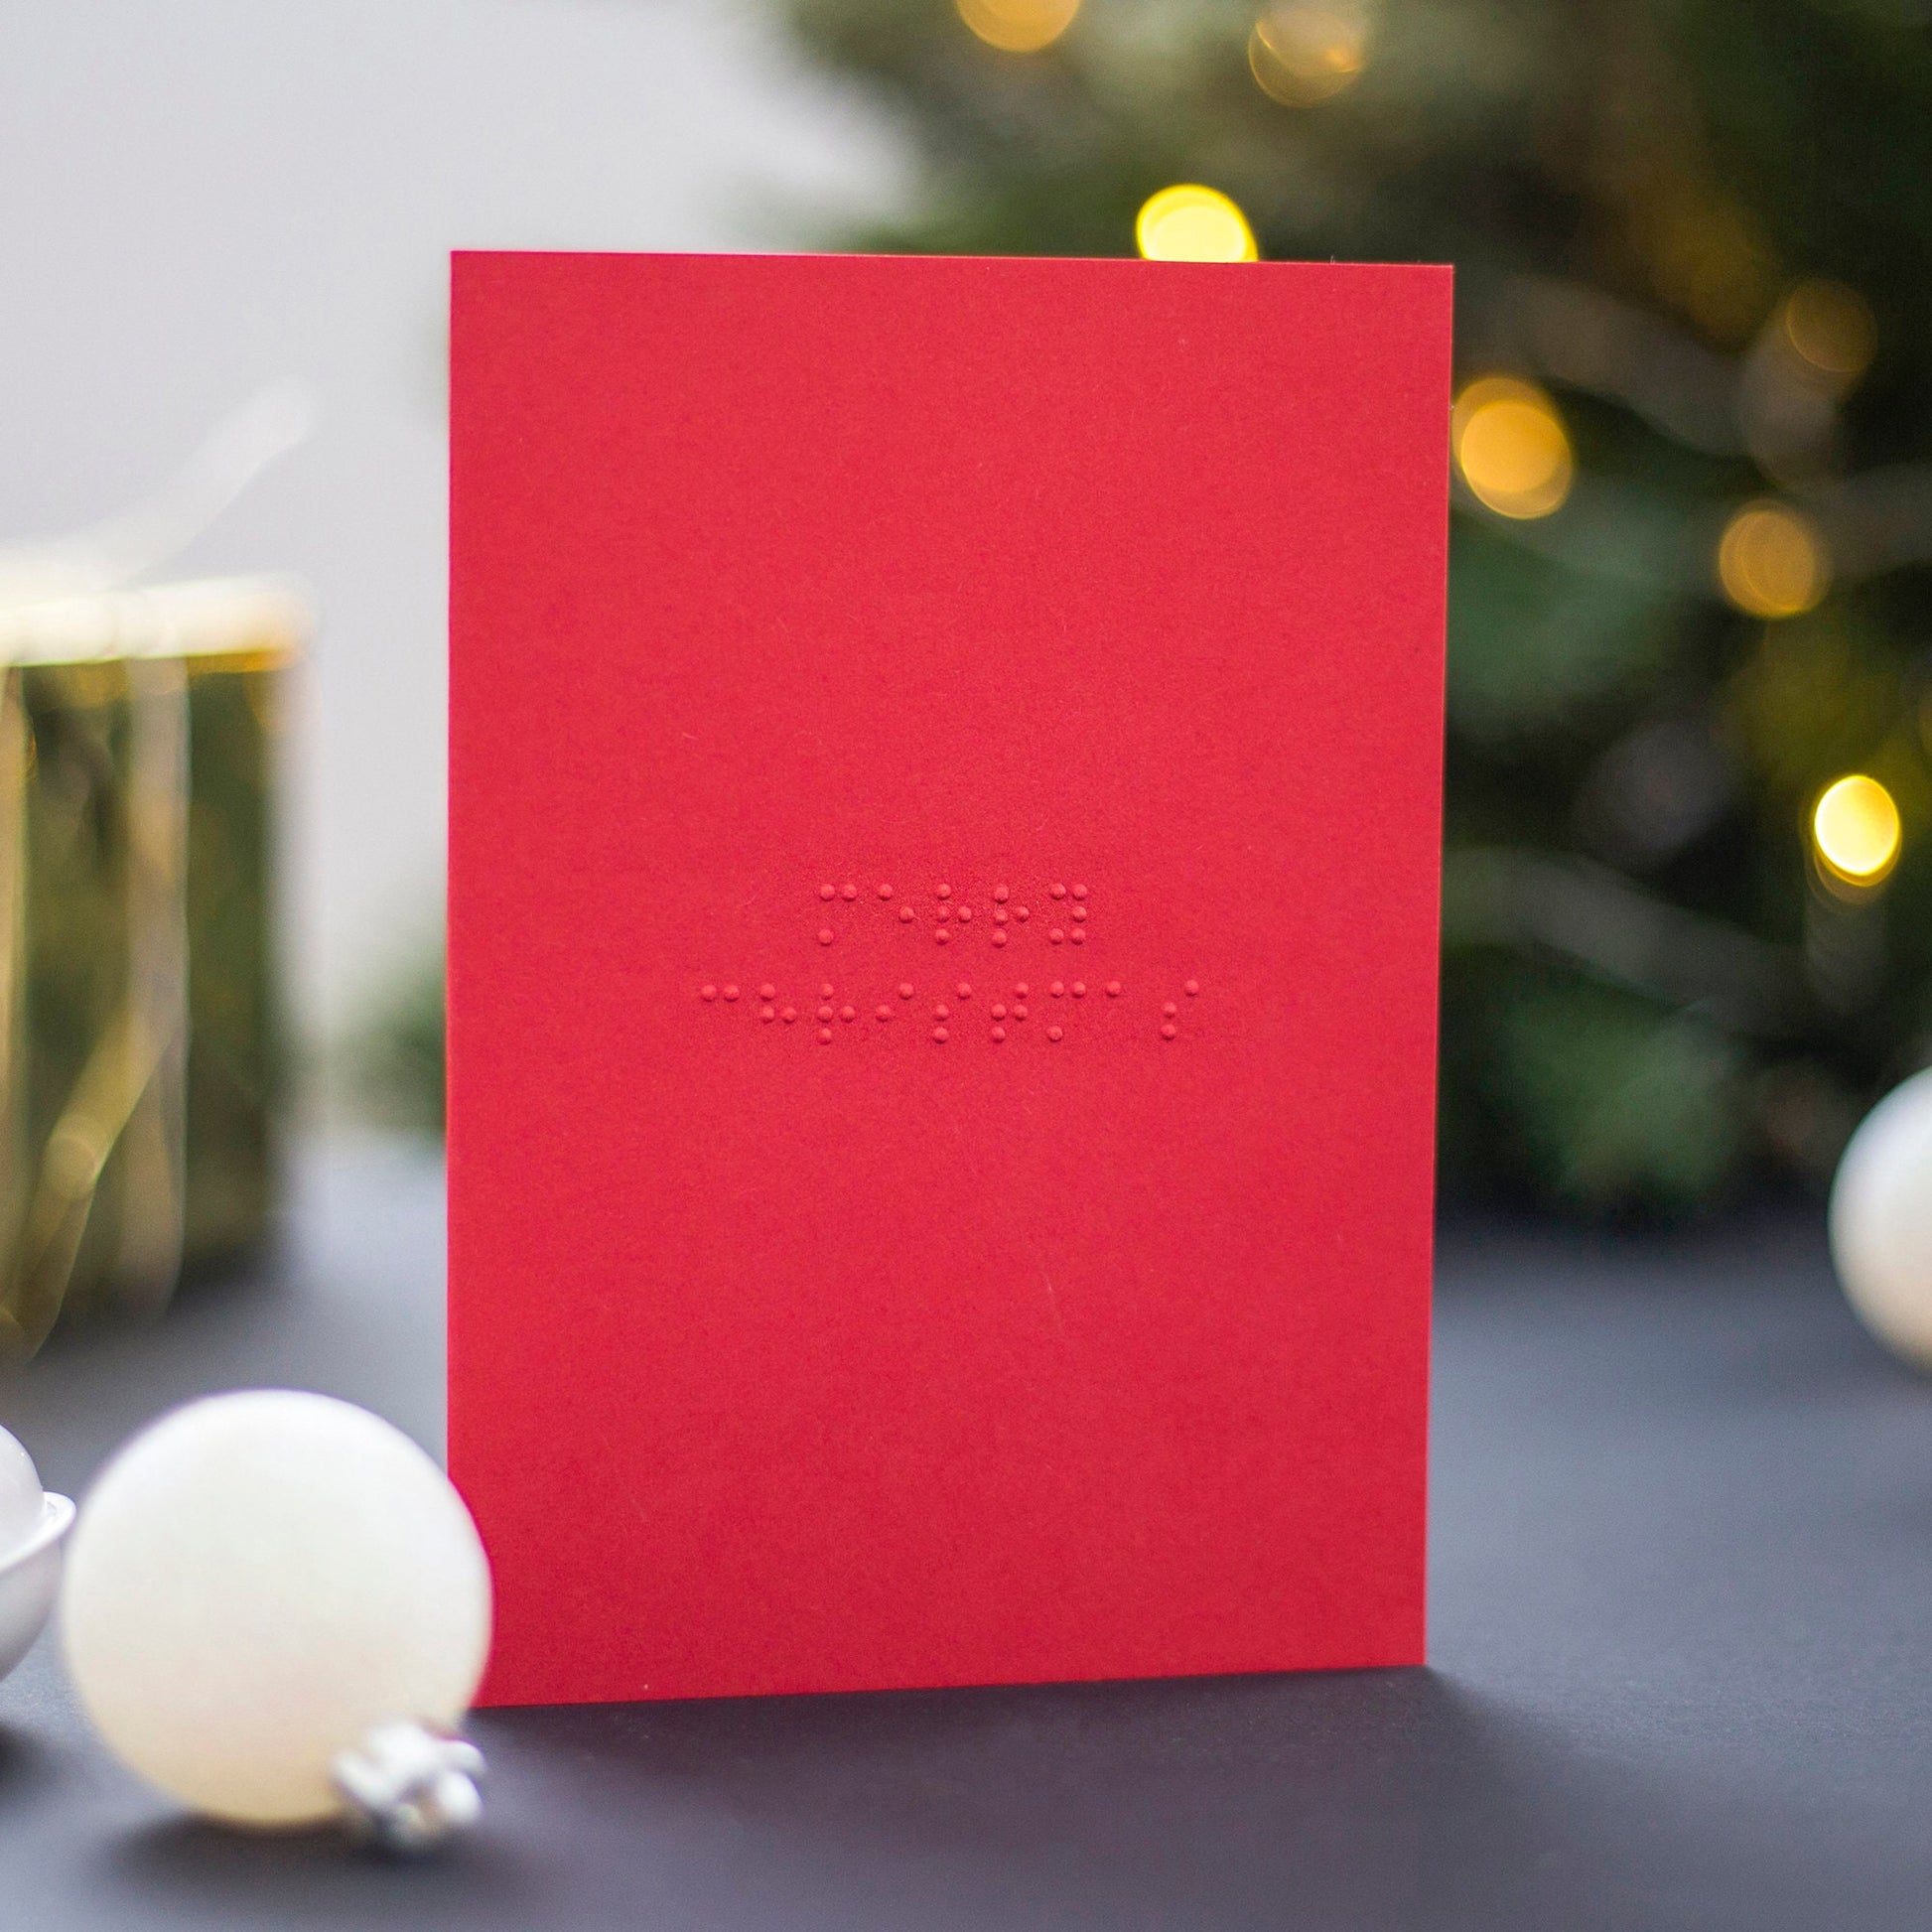 A red braille Christmas card with Merry Christmas written in lower case UEB.